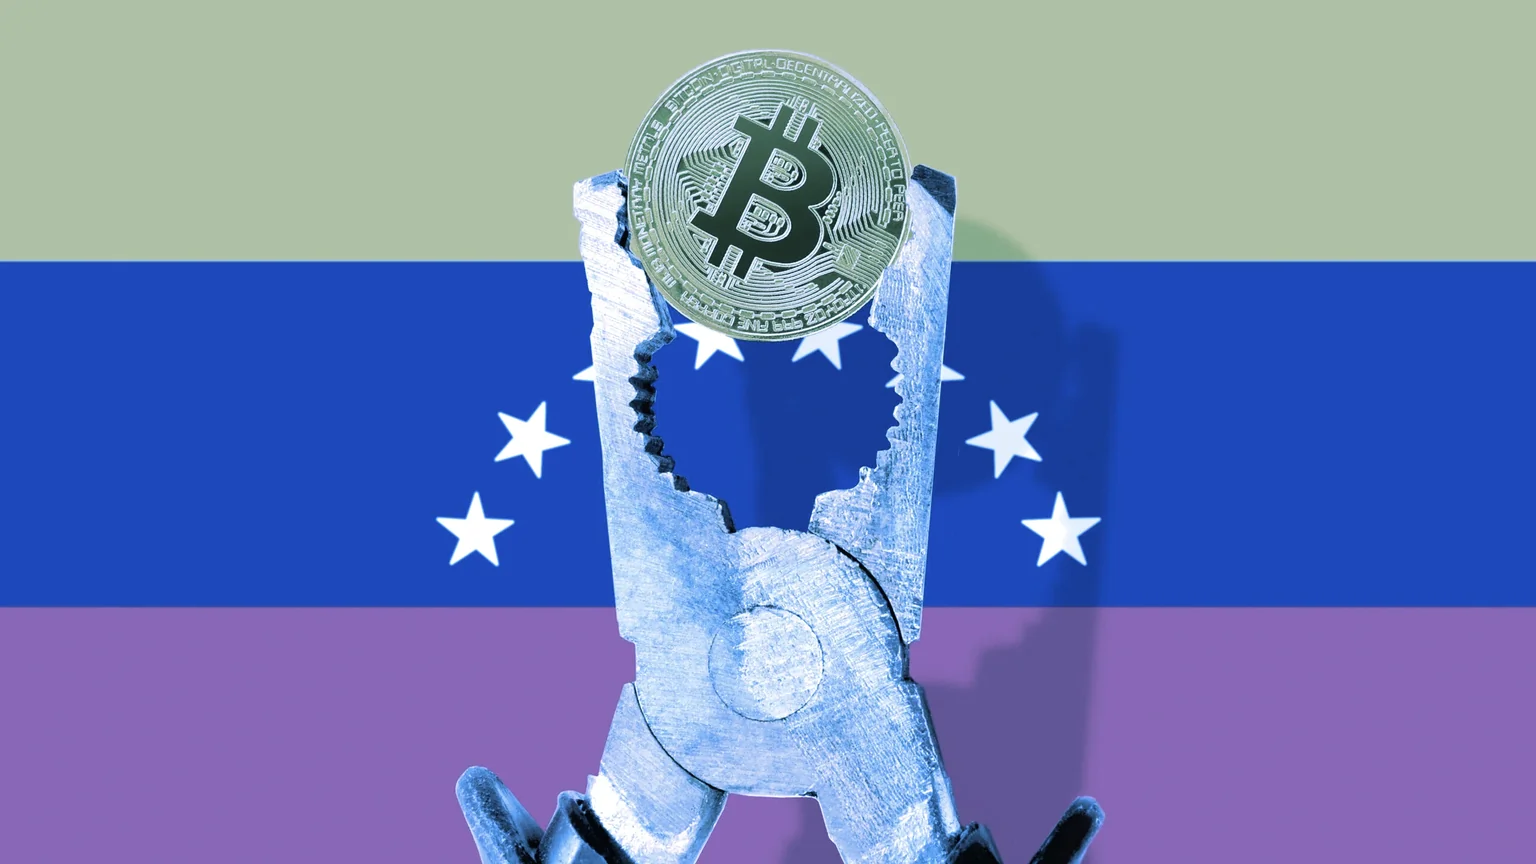 Authorities in Venezuela are putting the squeeze on cryptocurrency mining. Image: Shutterstock